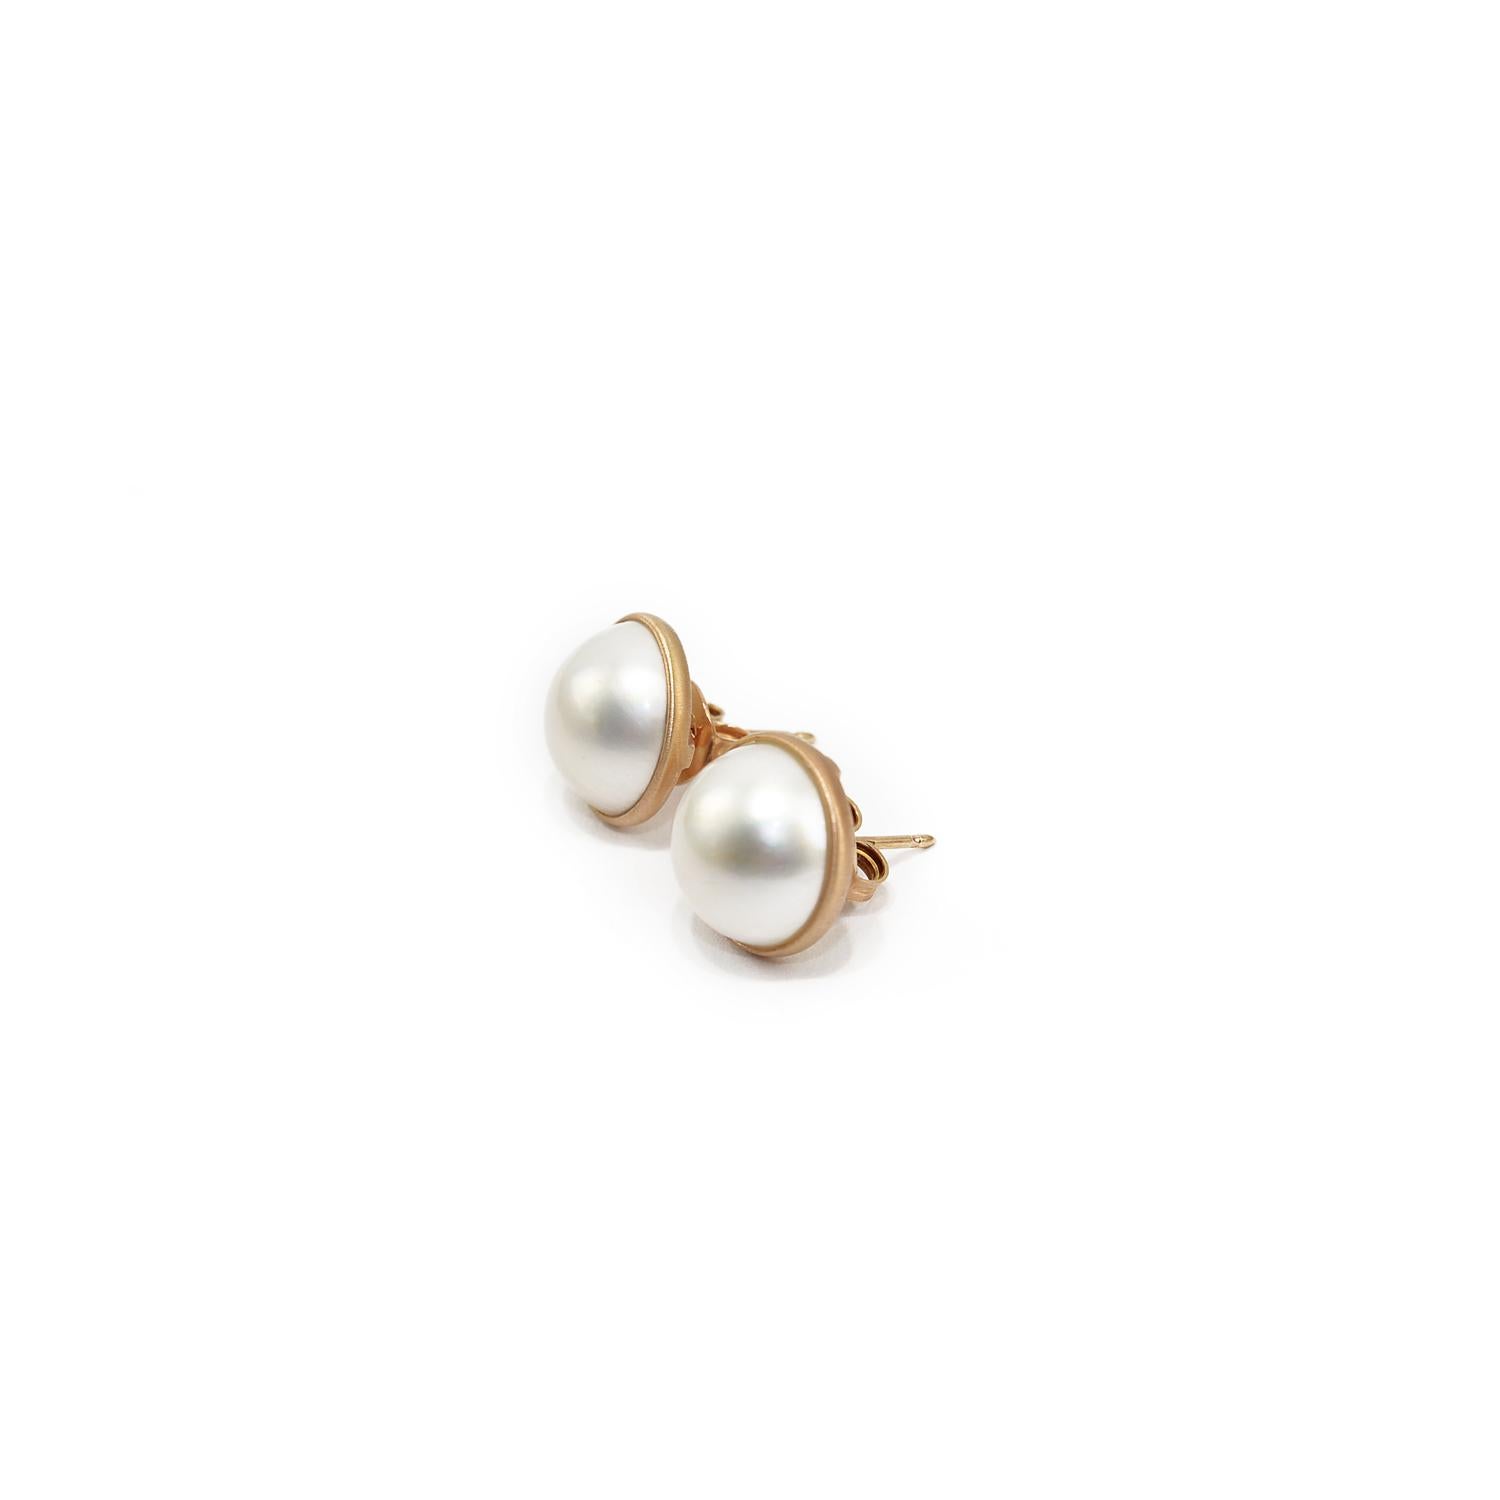 Artisan Stud Earrings in 18 Karat Gold and Mabe Pearls